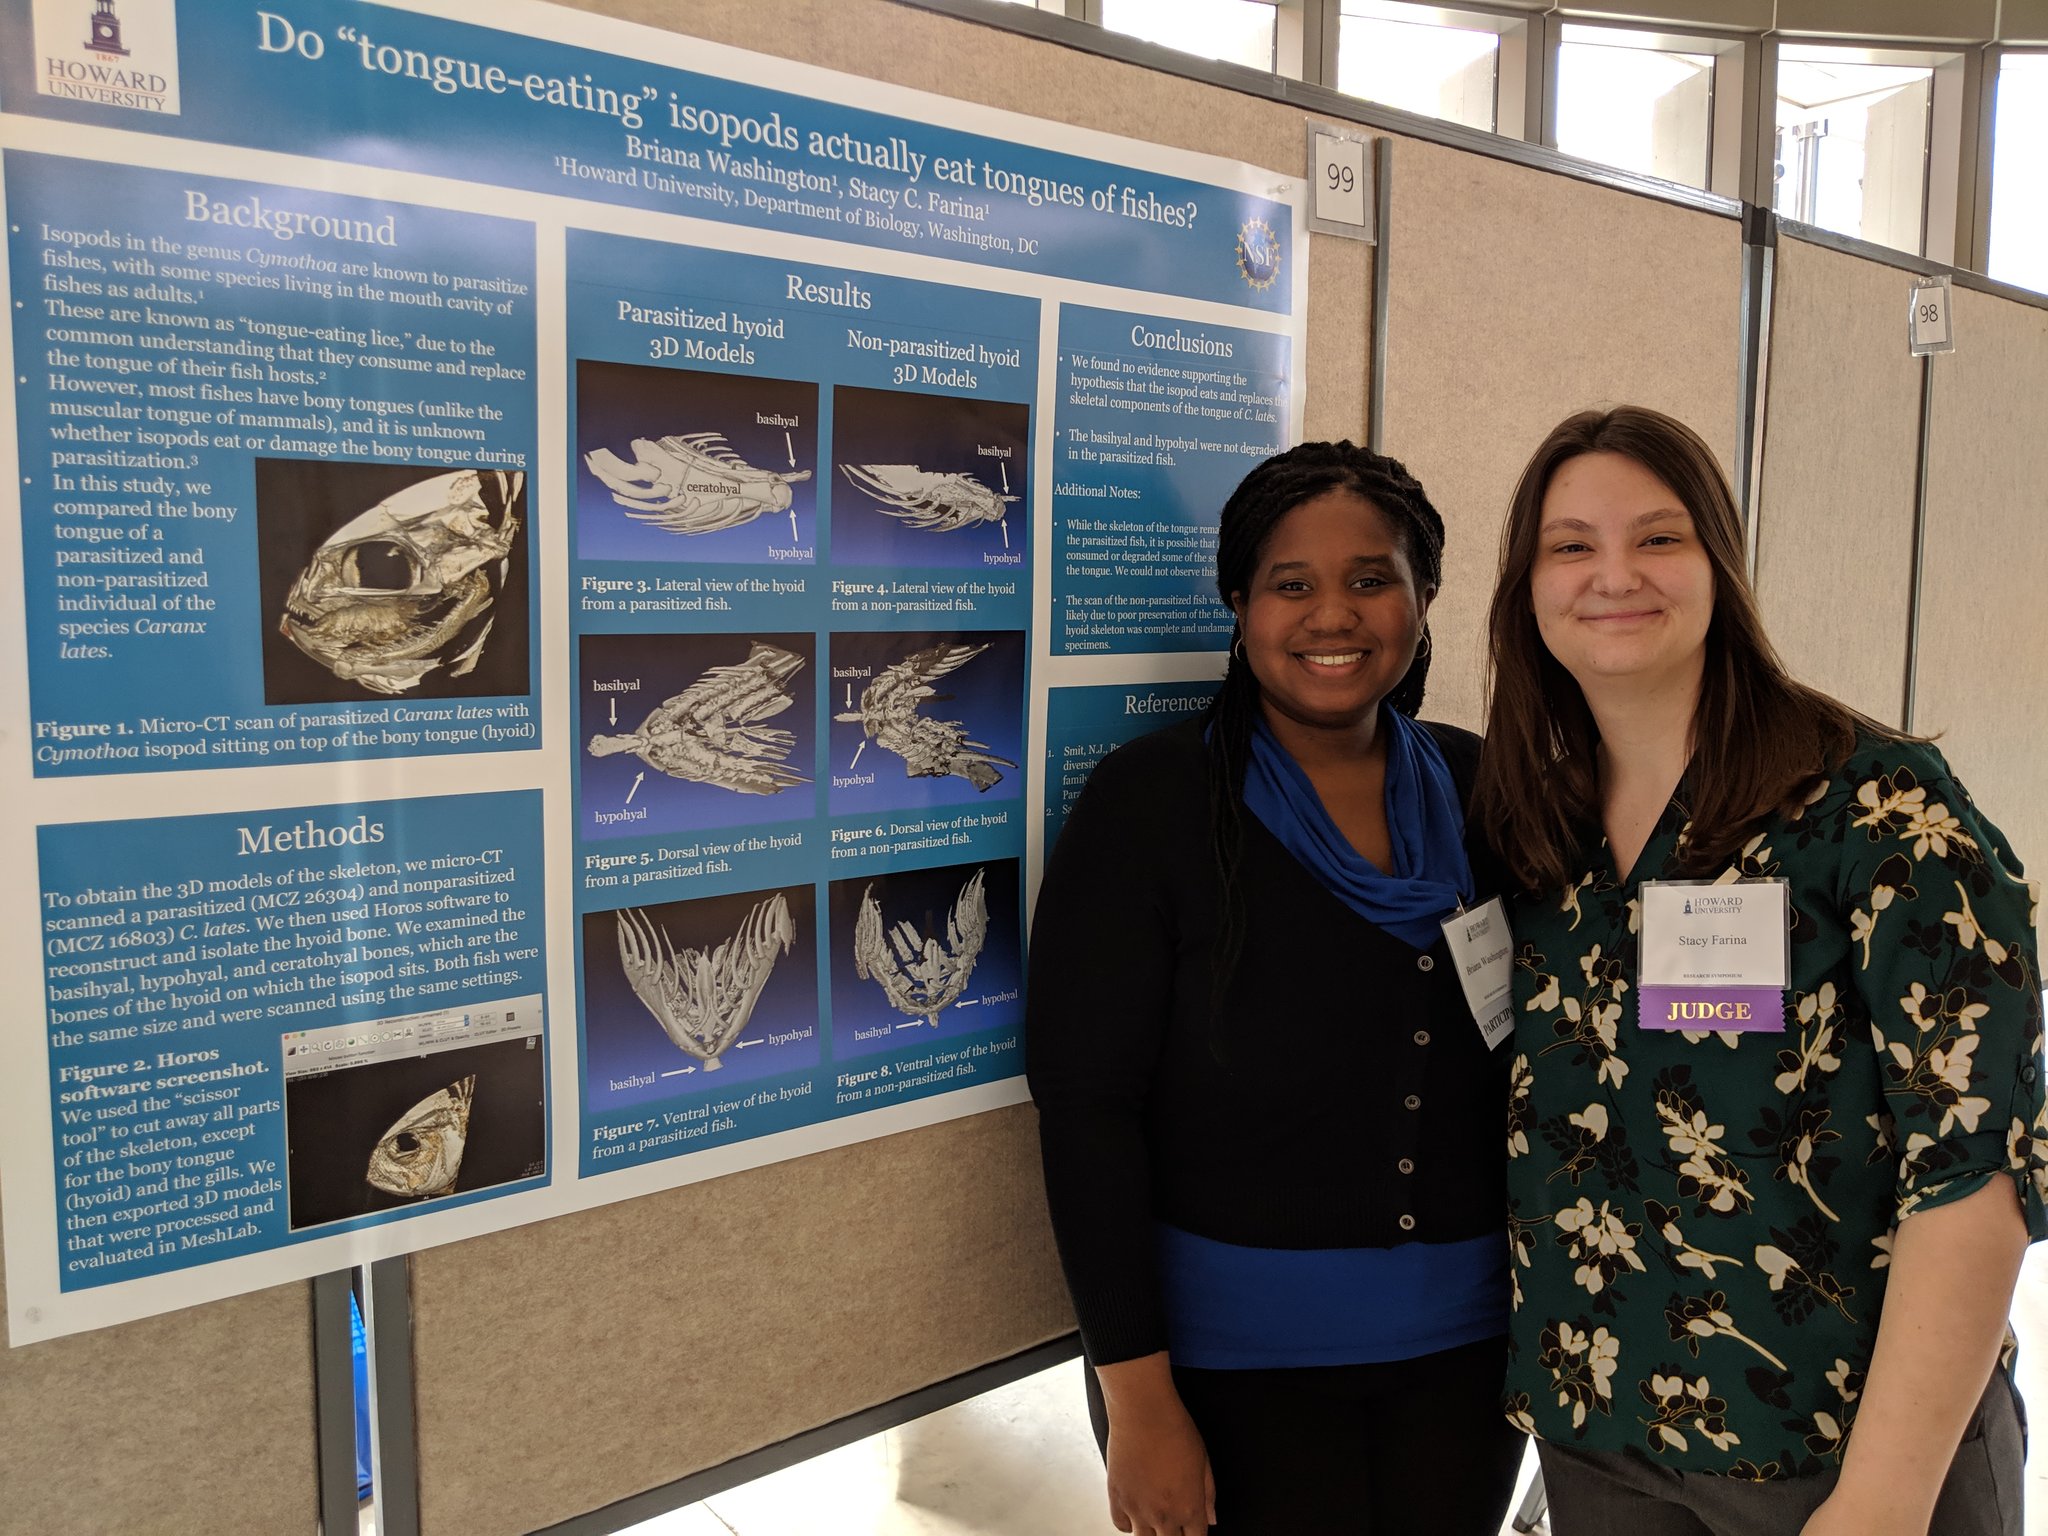 Poster de Briana Washington dont le titre est "Do "tongue eating" isopods actually eat tongues of fishes?"